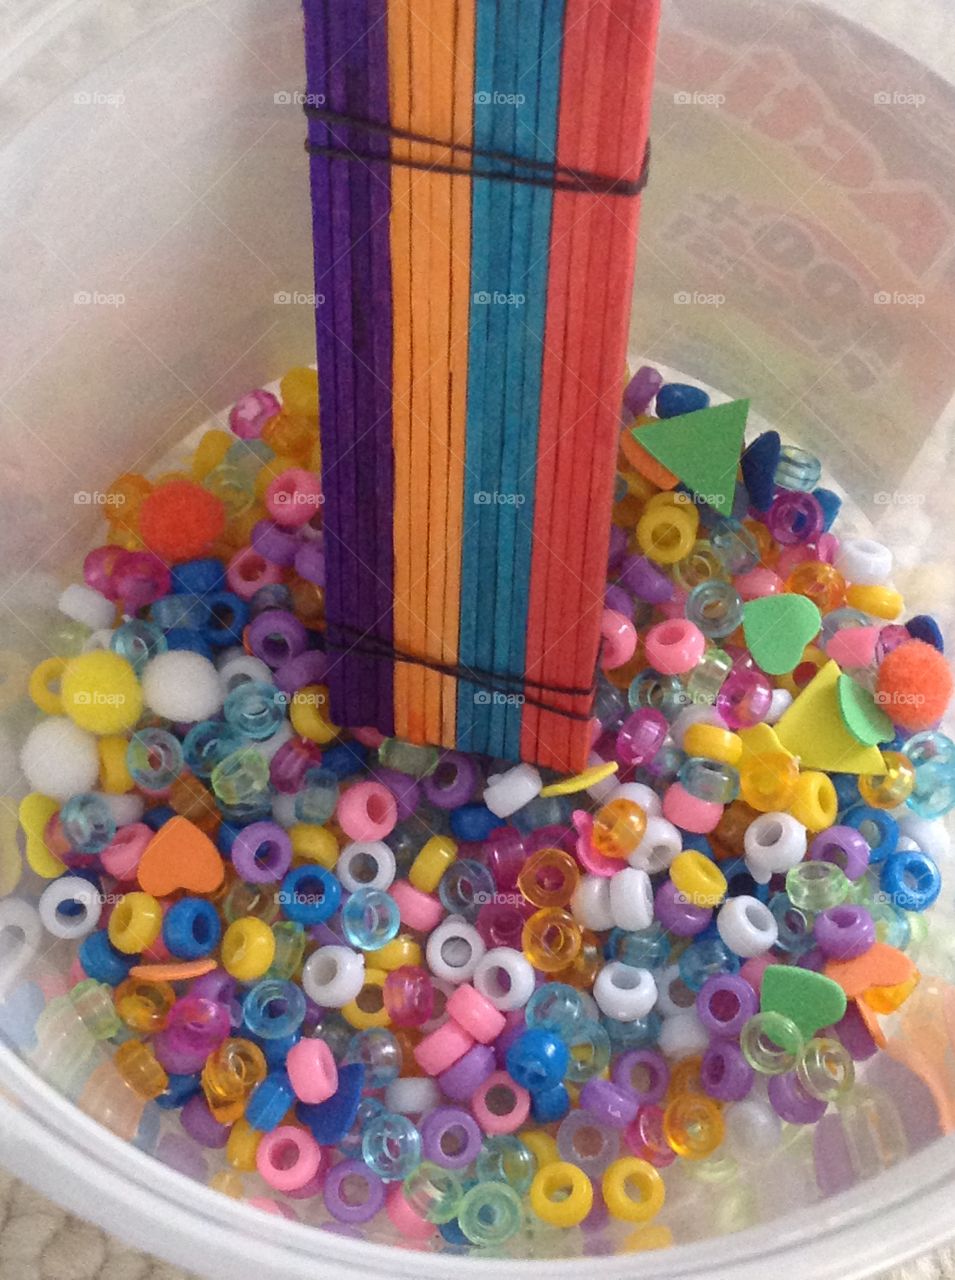 Different colors of popcicle sticks and colorful beads for arts and crafts supplies. 